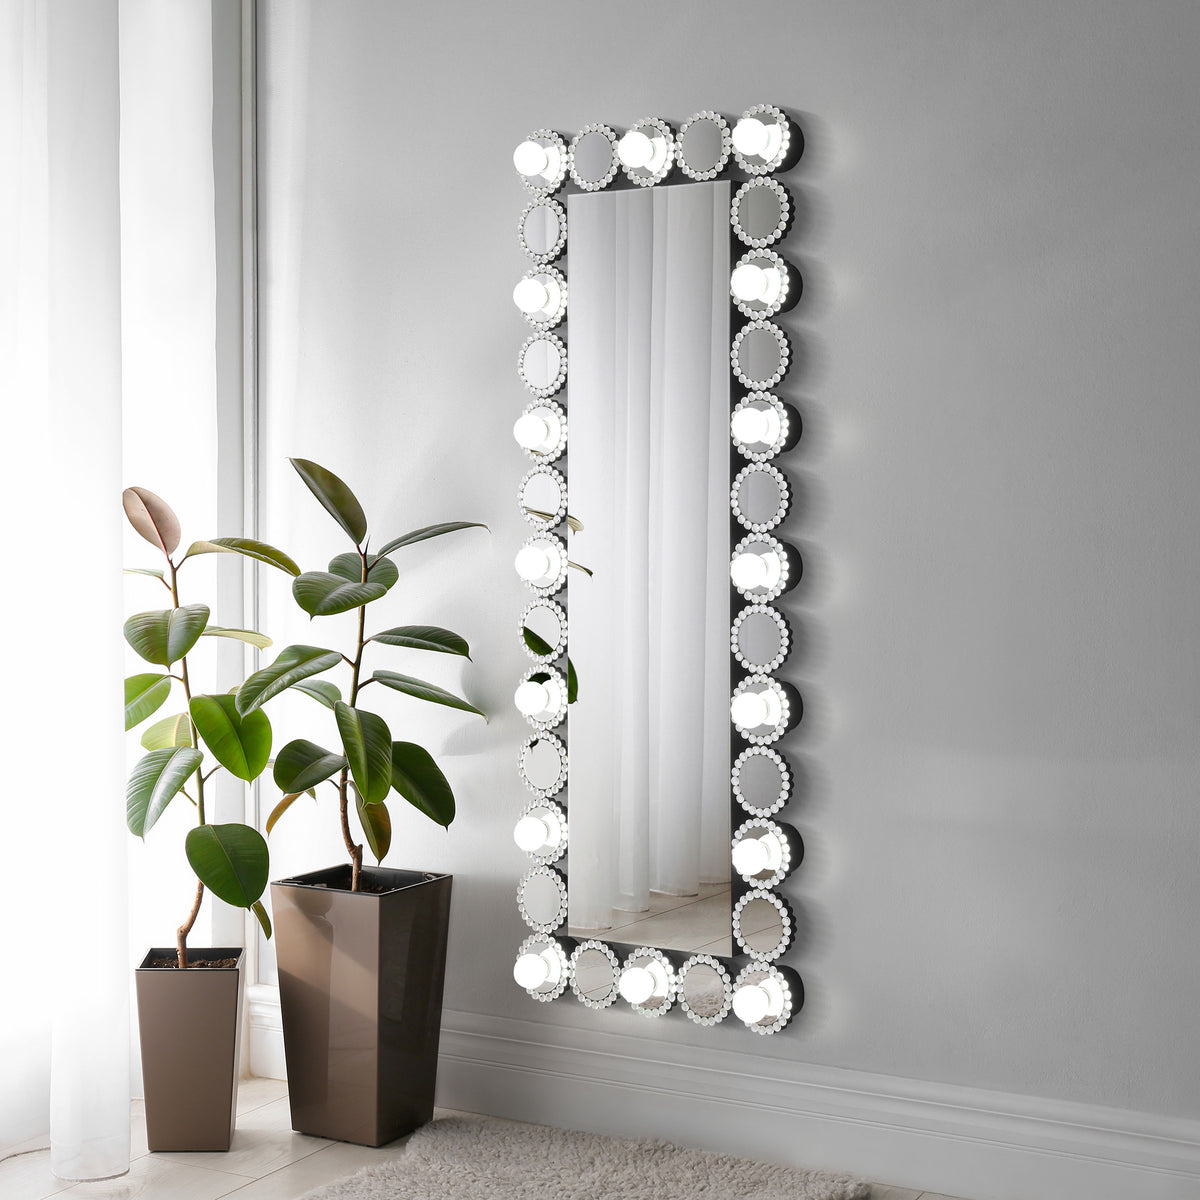 Aghes Rectangular Wall Mirror with LED Lighting Mirror Aghes Rectangular Wall Mirror with LED Lighting Mirror Half Price Furniture